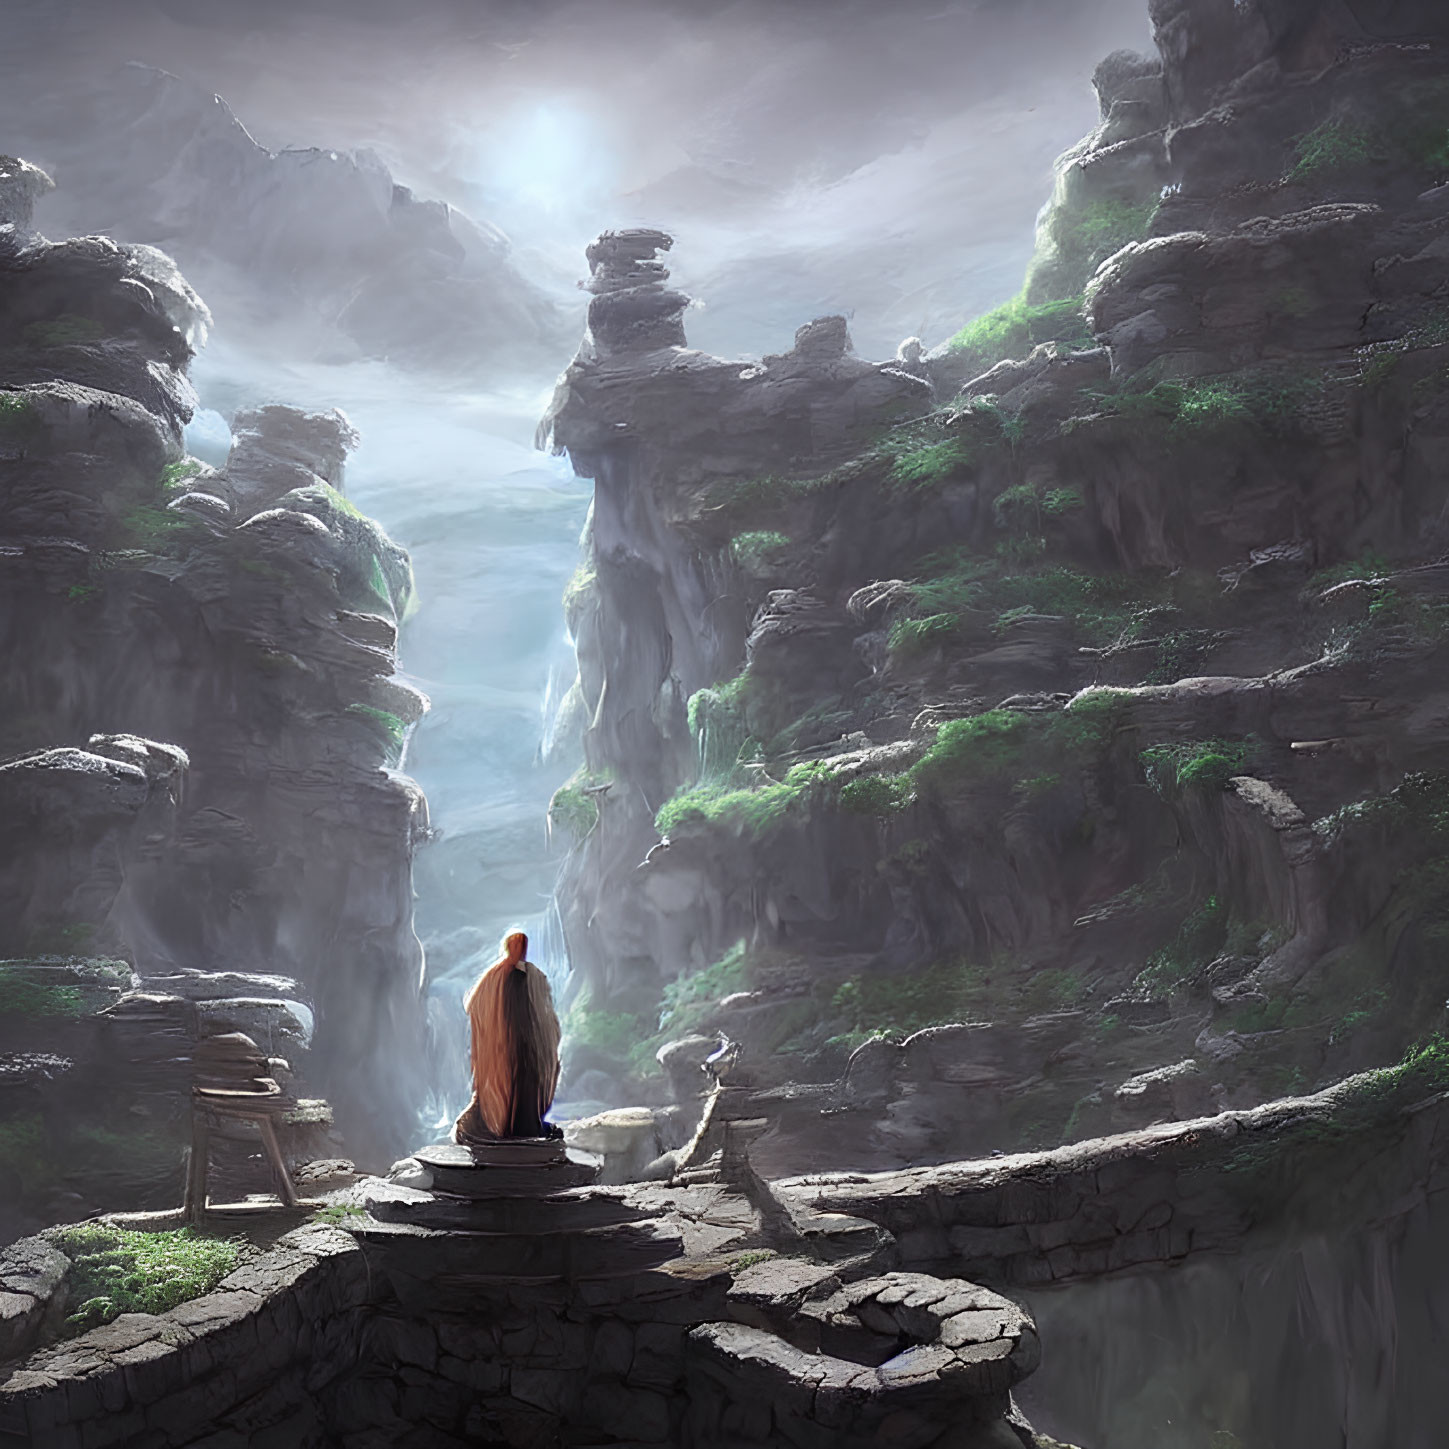 Robed Figure Overlooking Canyon with Waterfalls